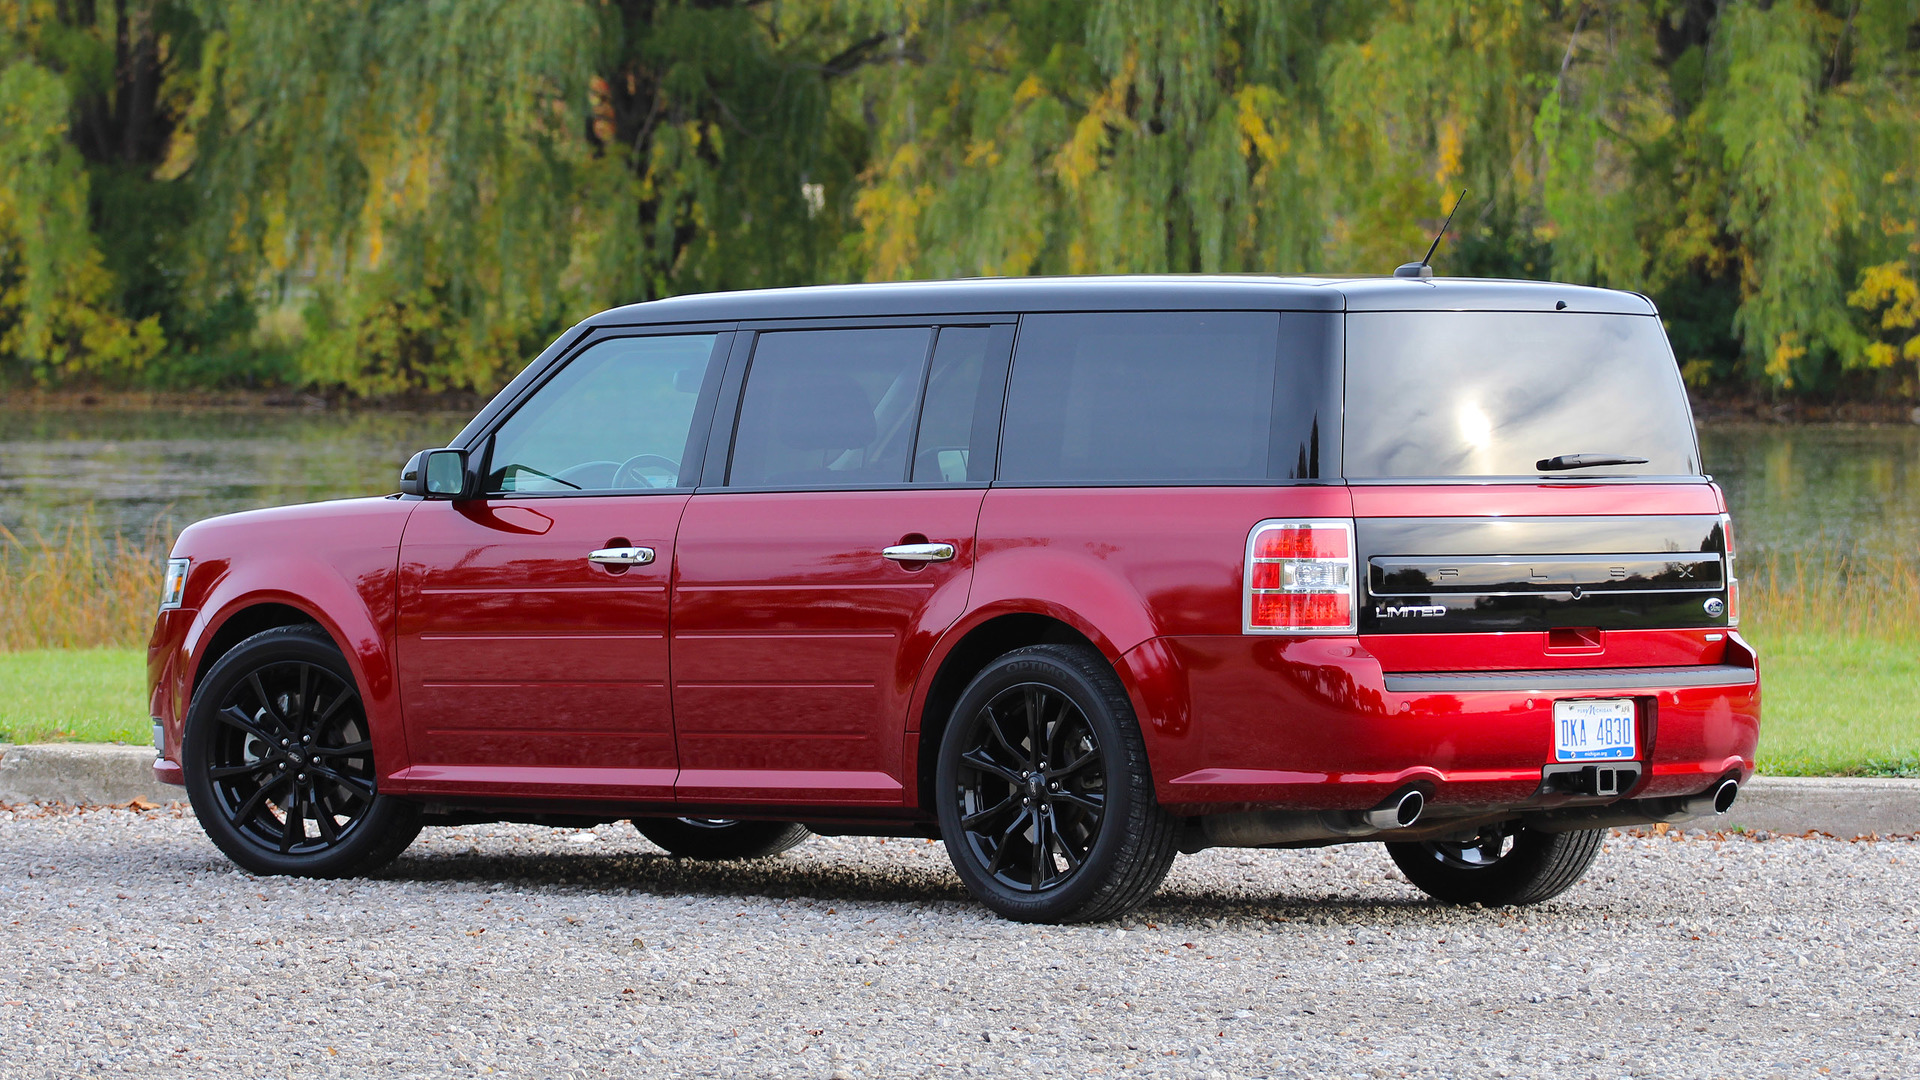 2016 Ford Flex Review: Minivan for cool dads